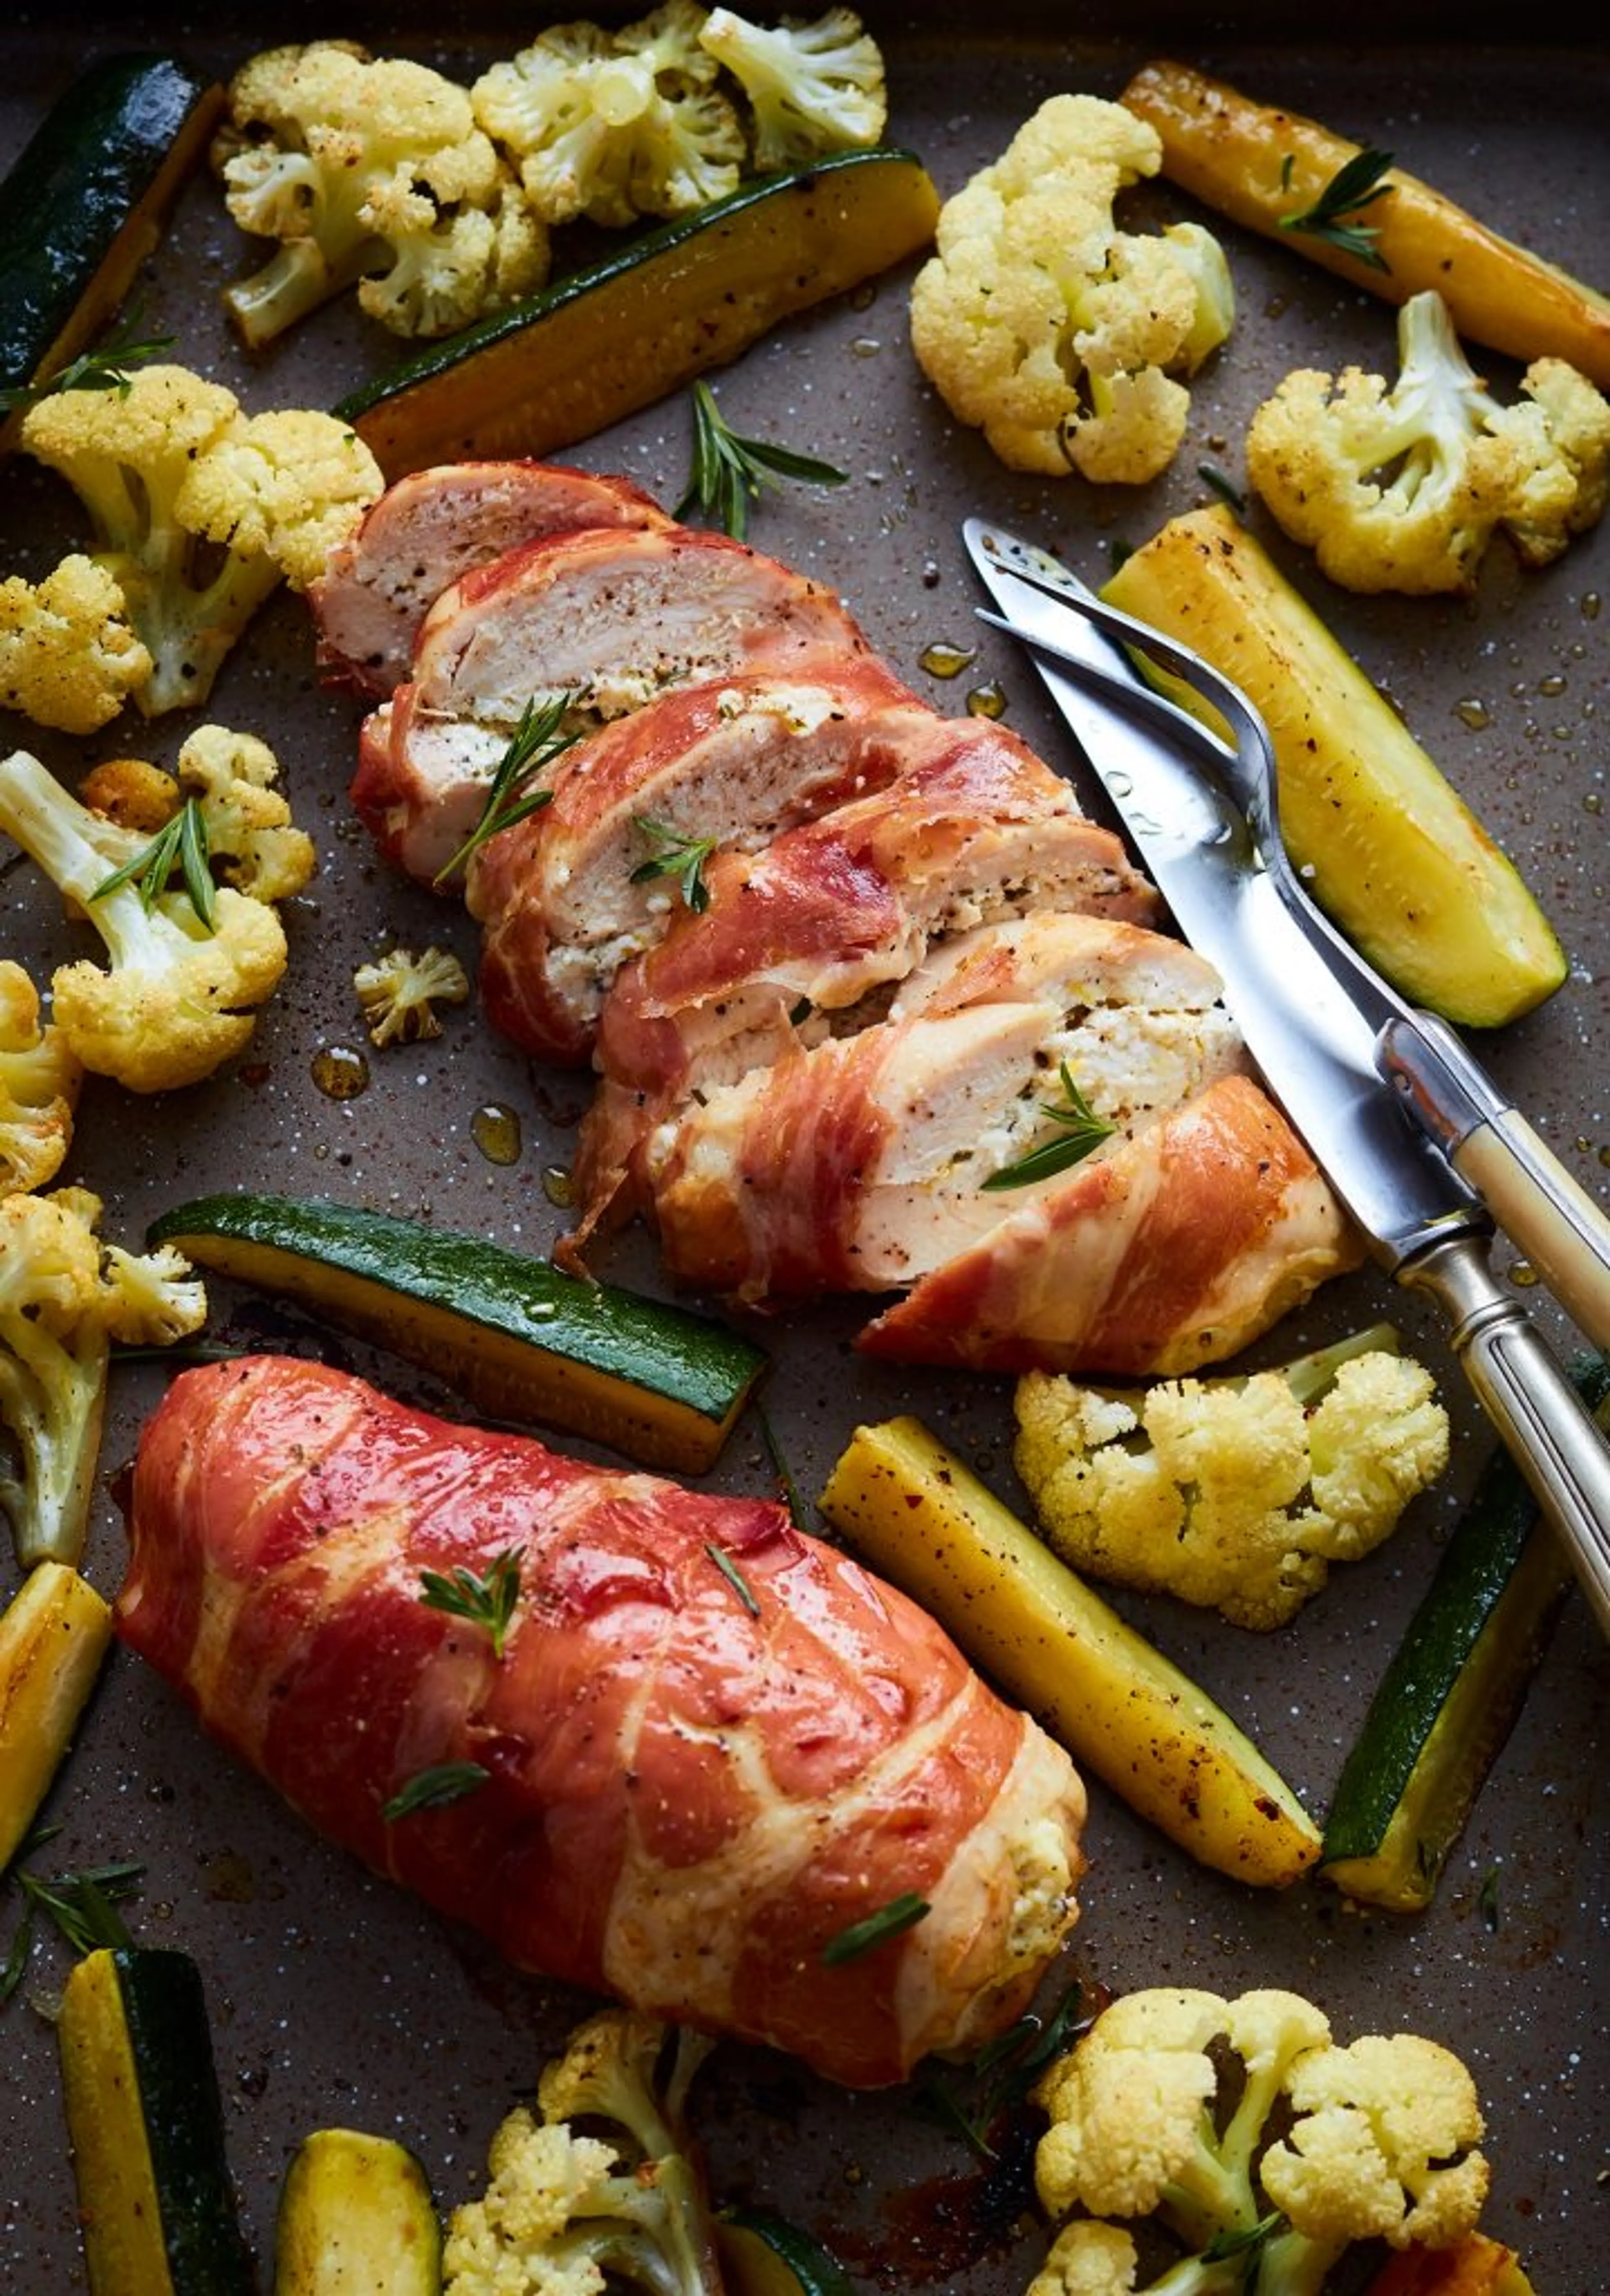 Proscuitto wrapped, ricotta stuffed chicken breast